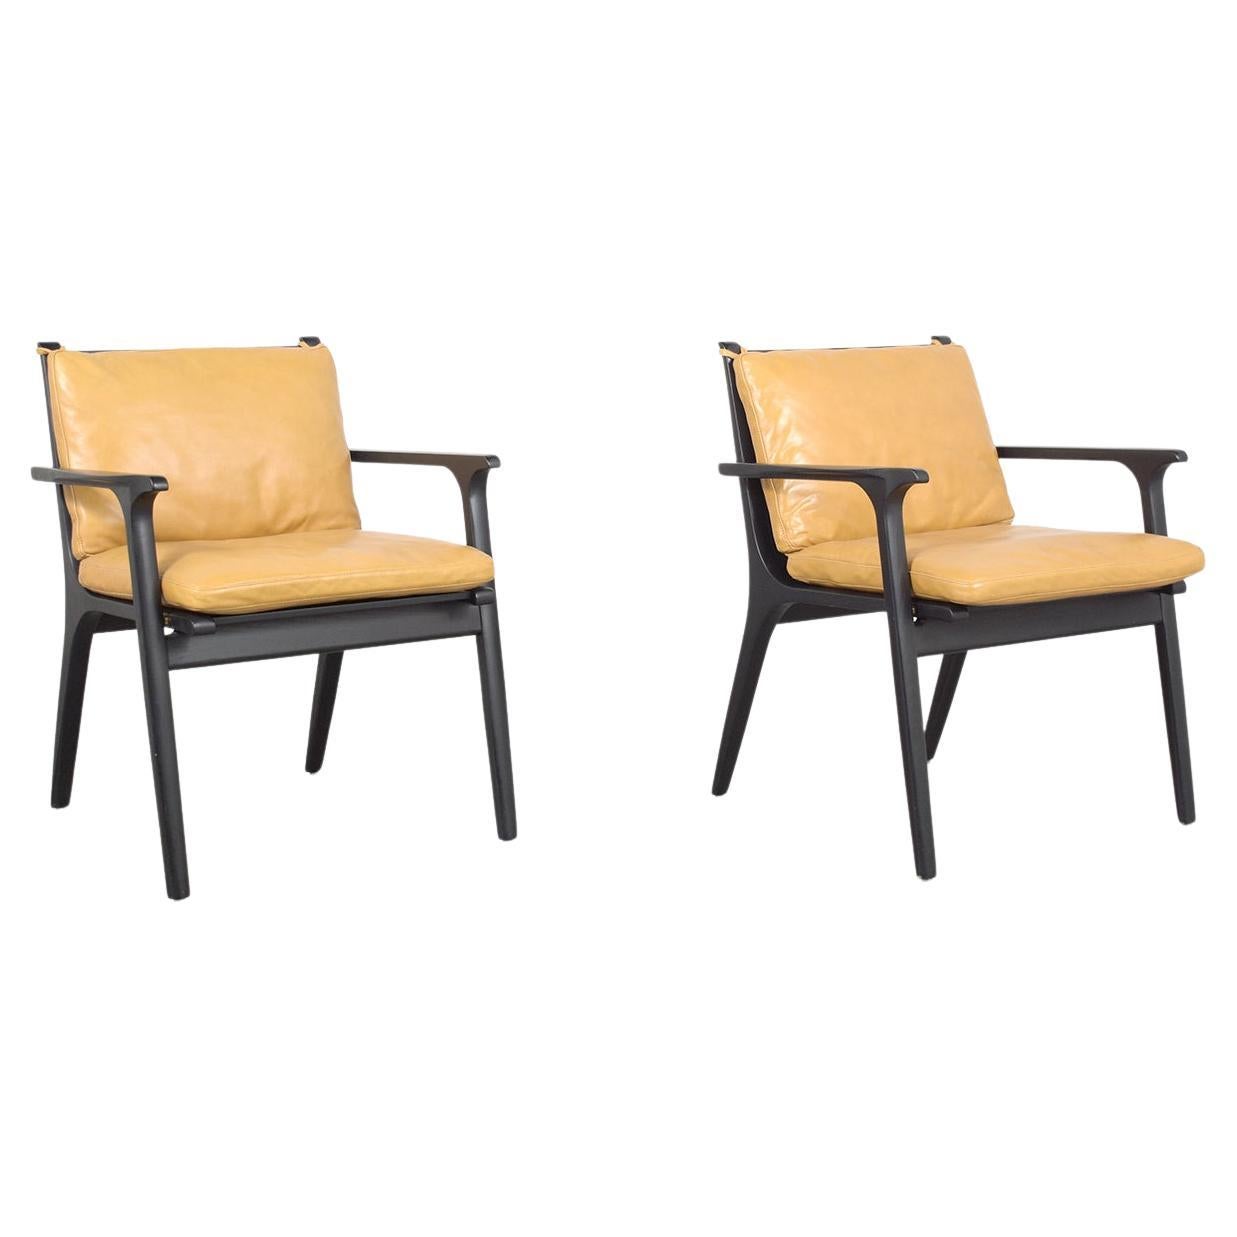 Modern Leather Armchairs: Mustard Yellow Upholstery with Black Oak Frame For Sale